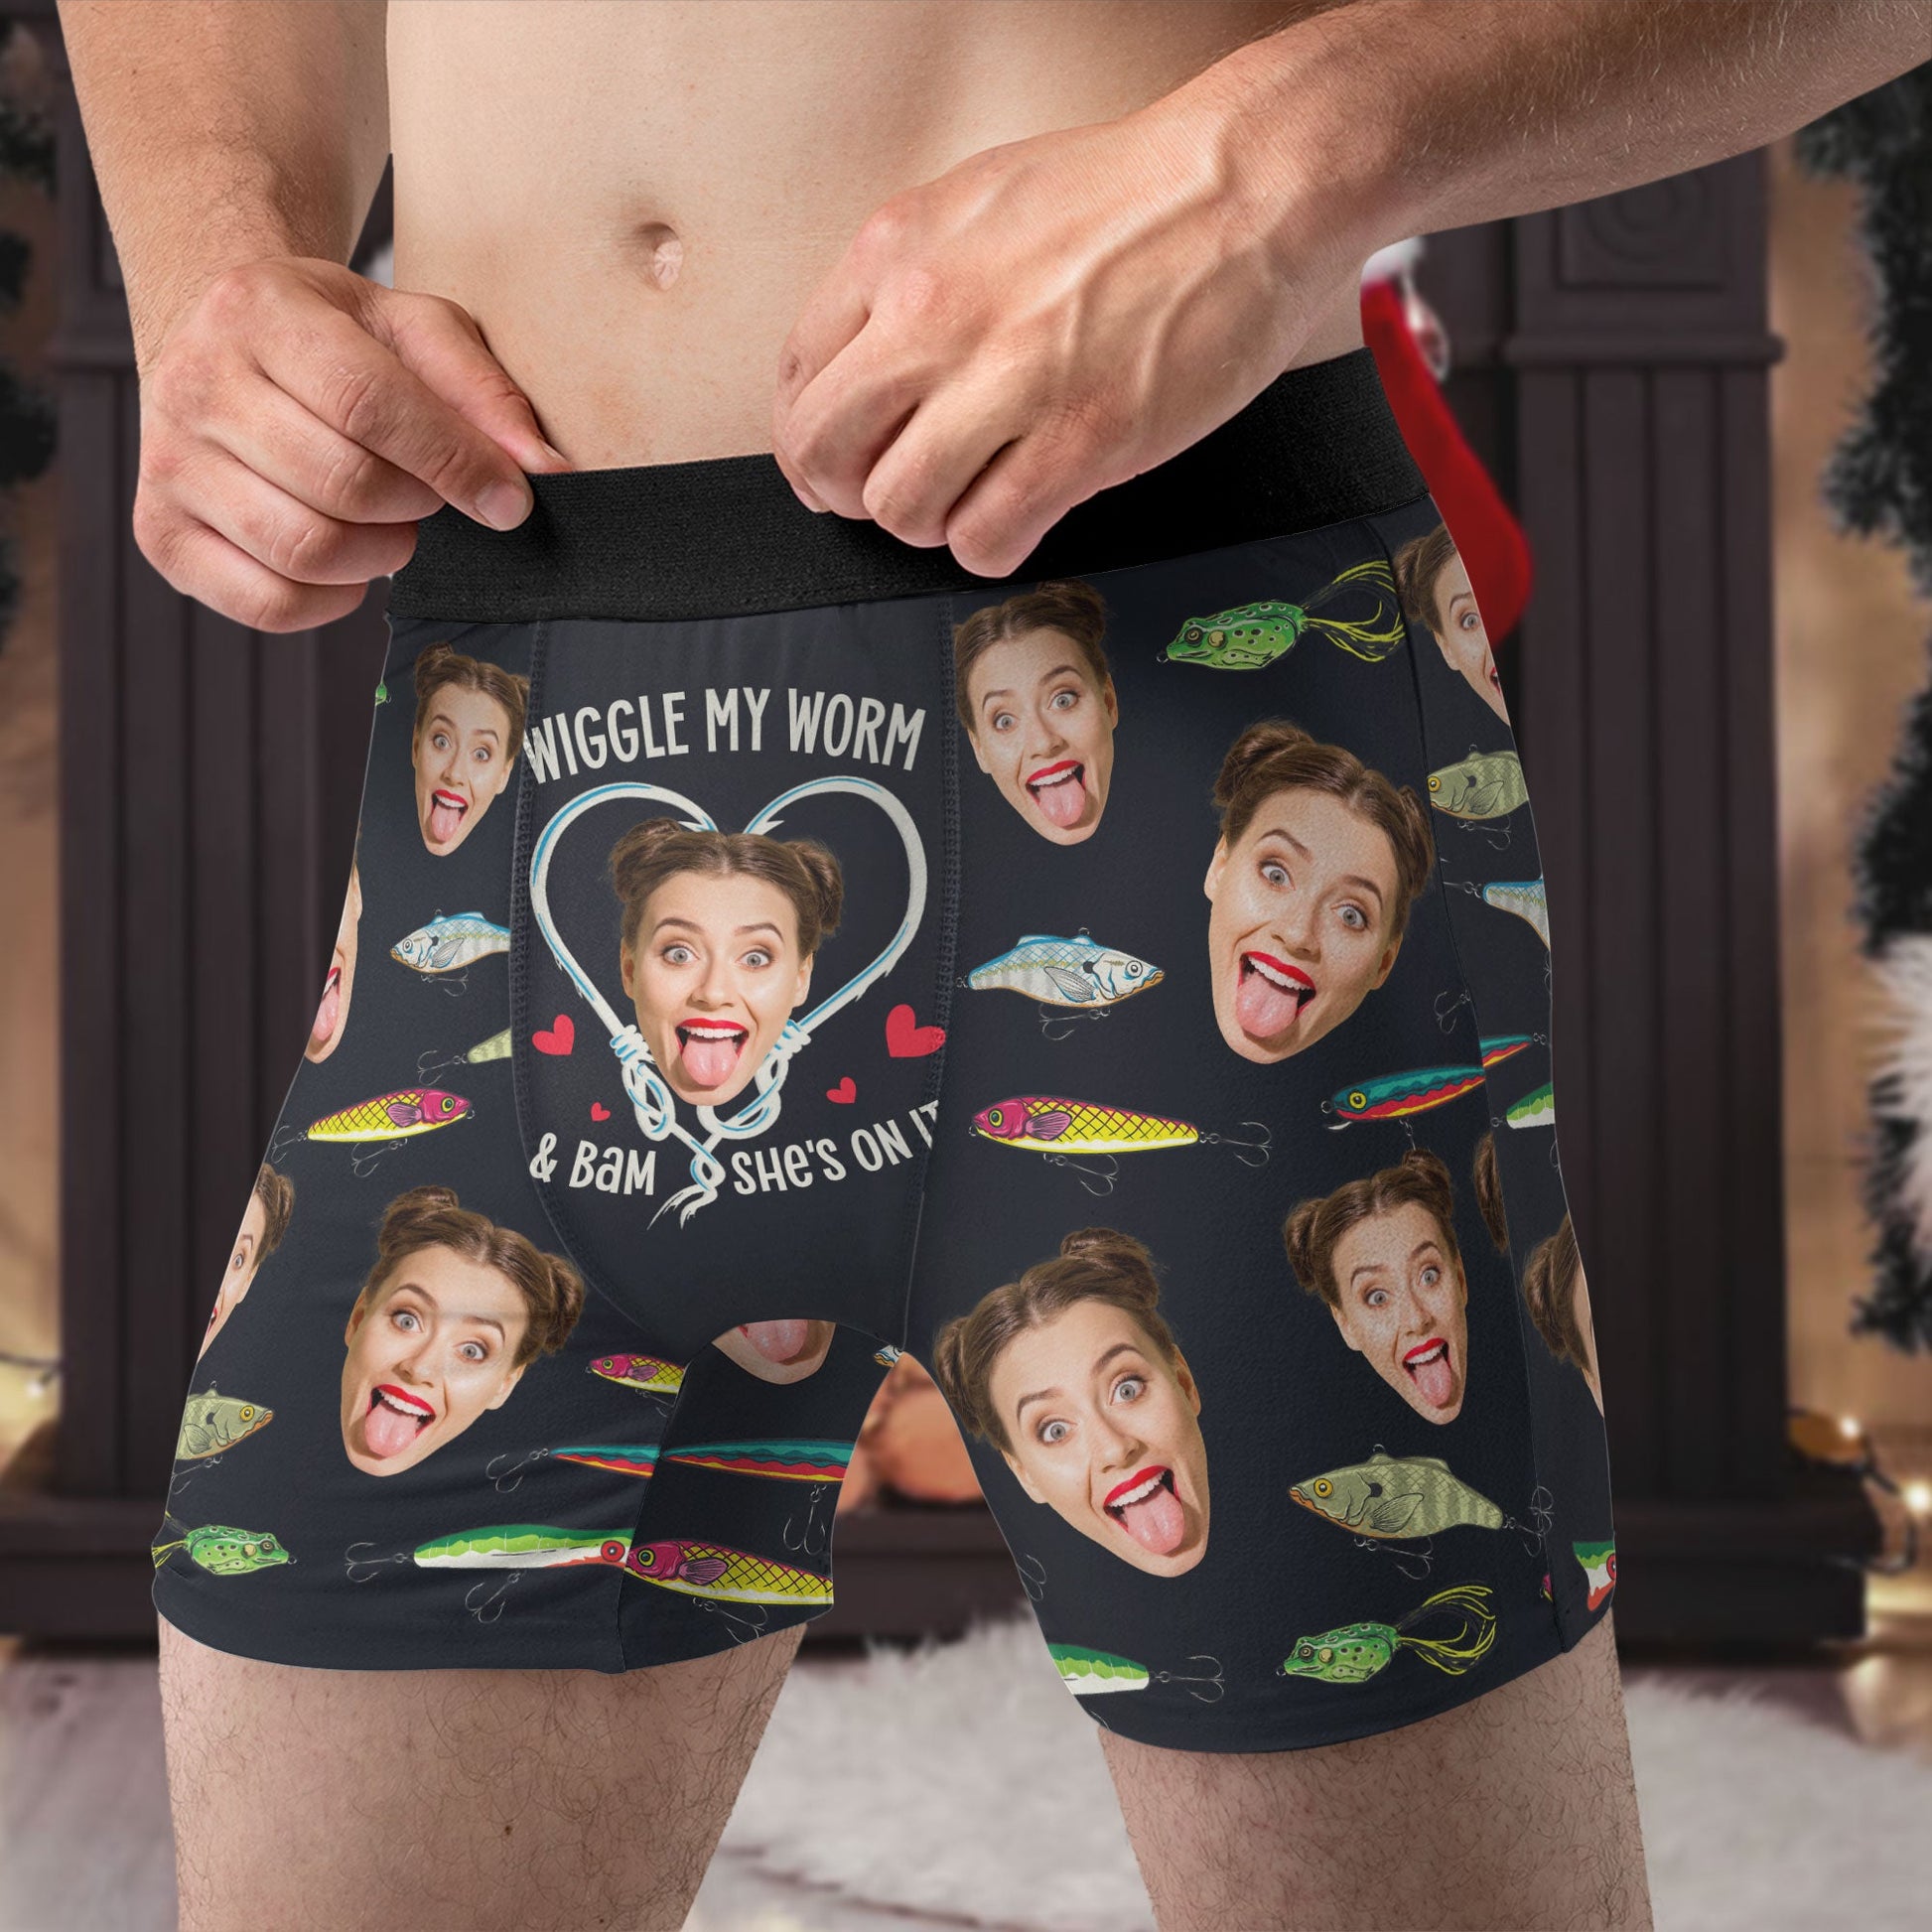 Only Wife Can Jingle My Bells - Personalized Photo Men's Boxer Briefs